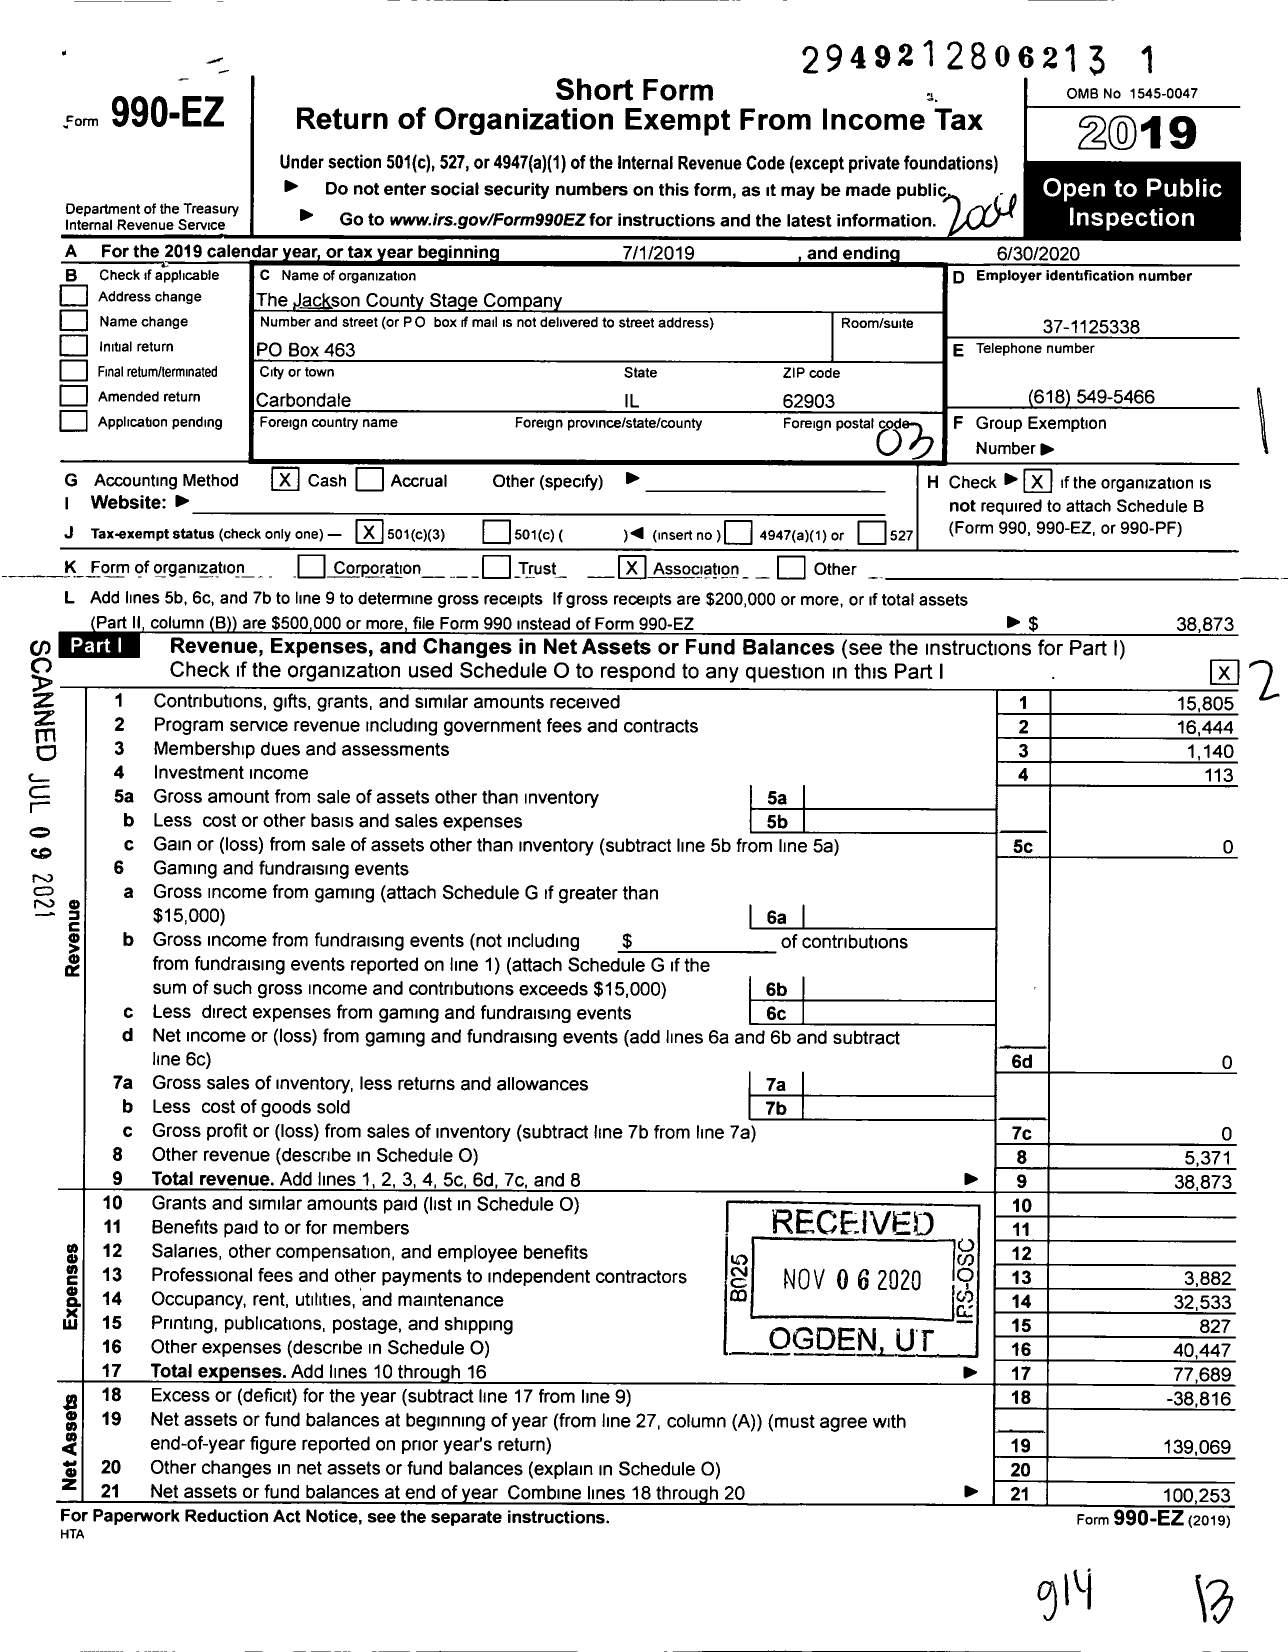 Image of first page of 2019 Form 990EZ for The Jackson County Stage Company